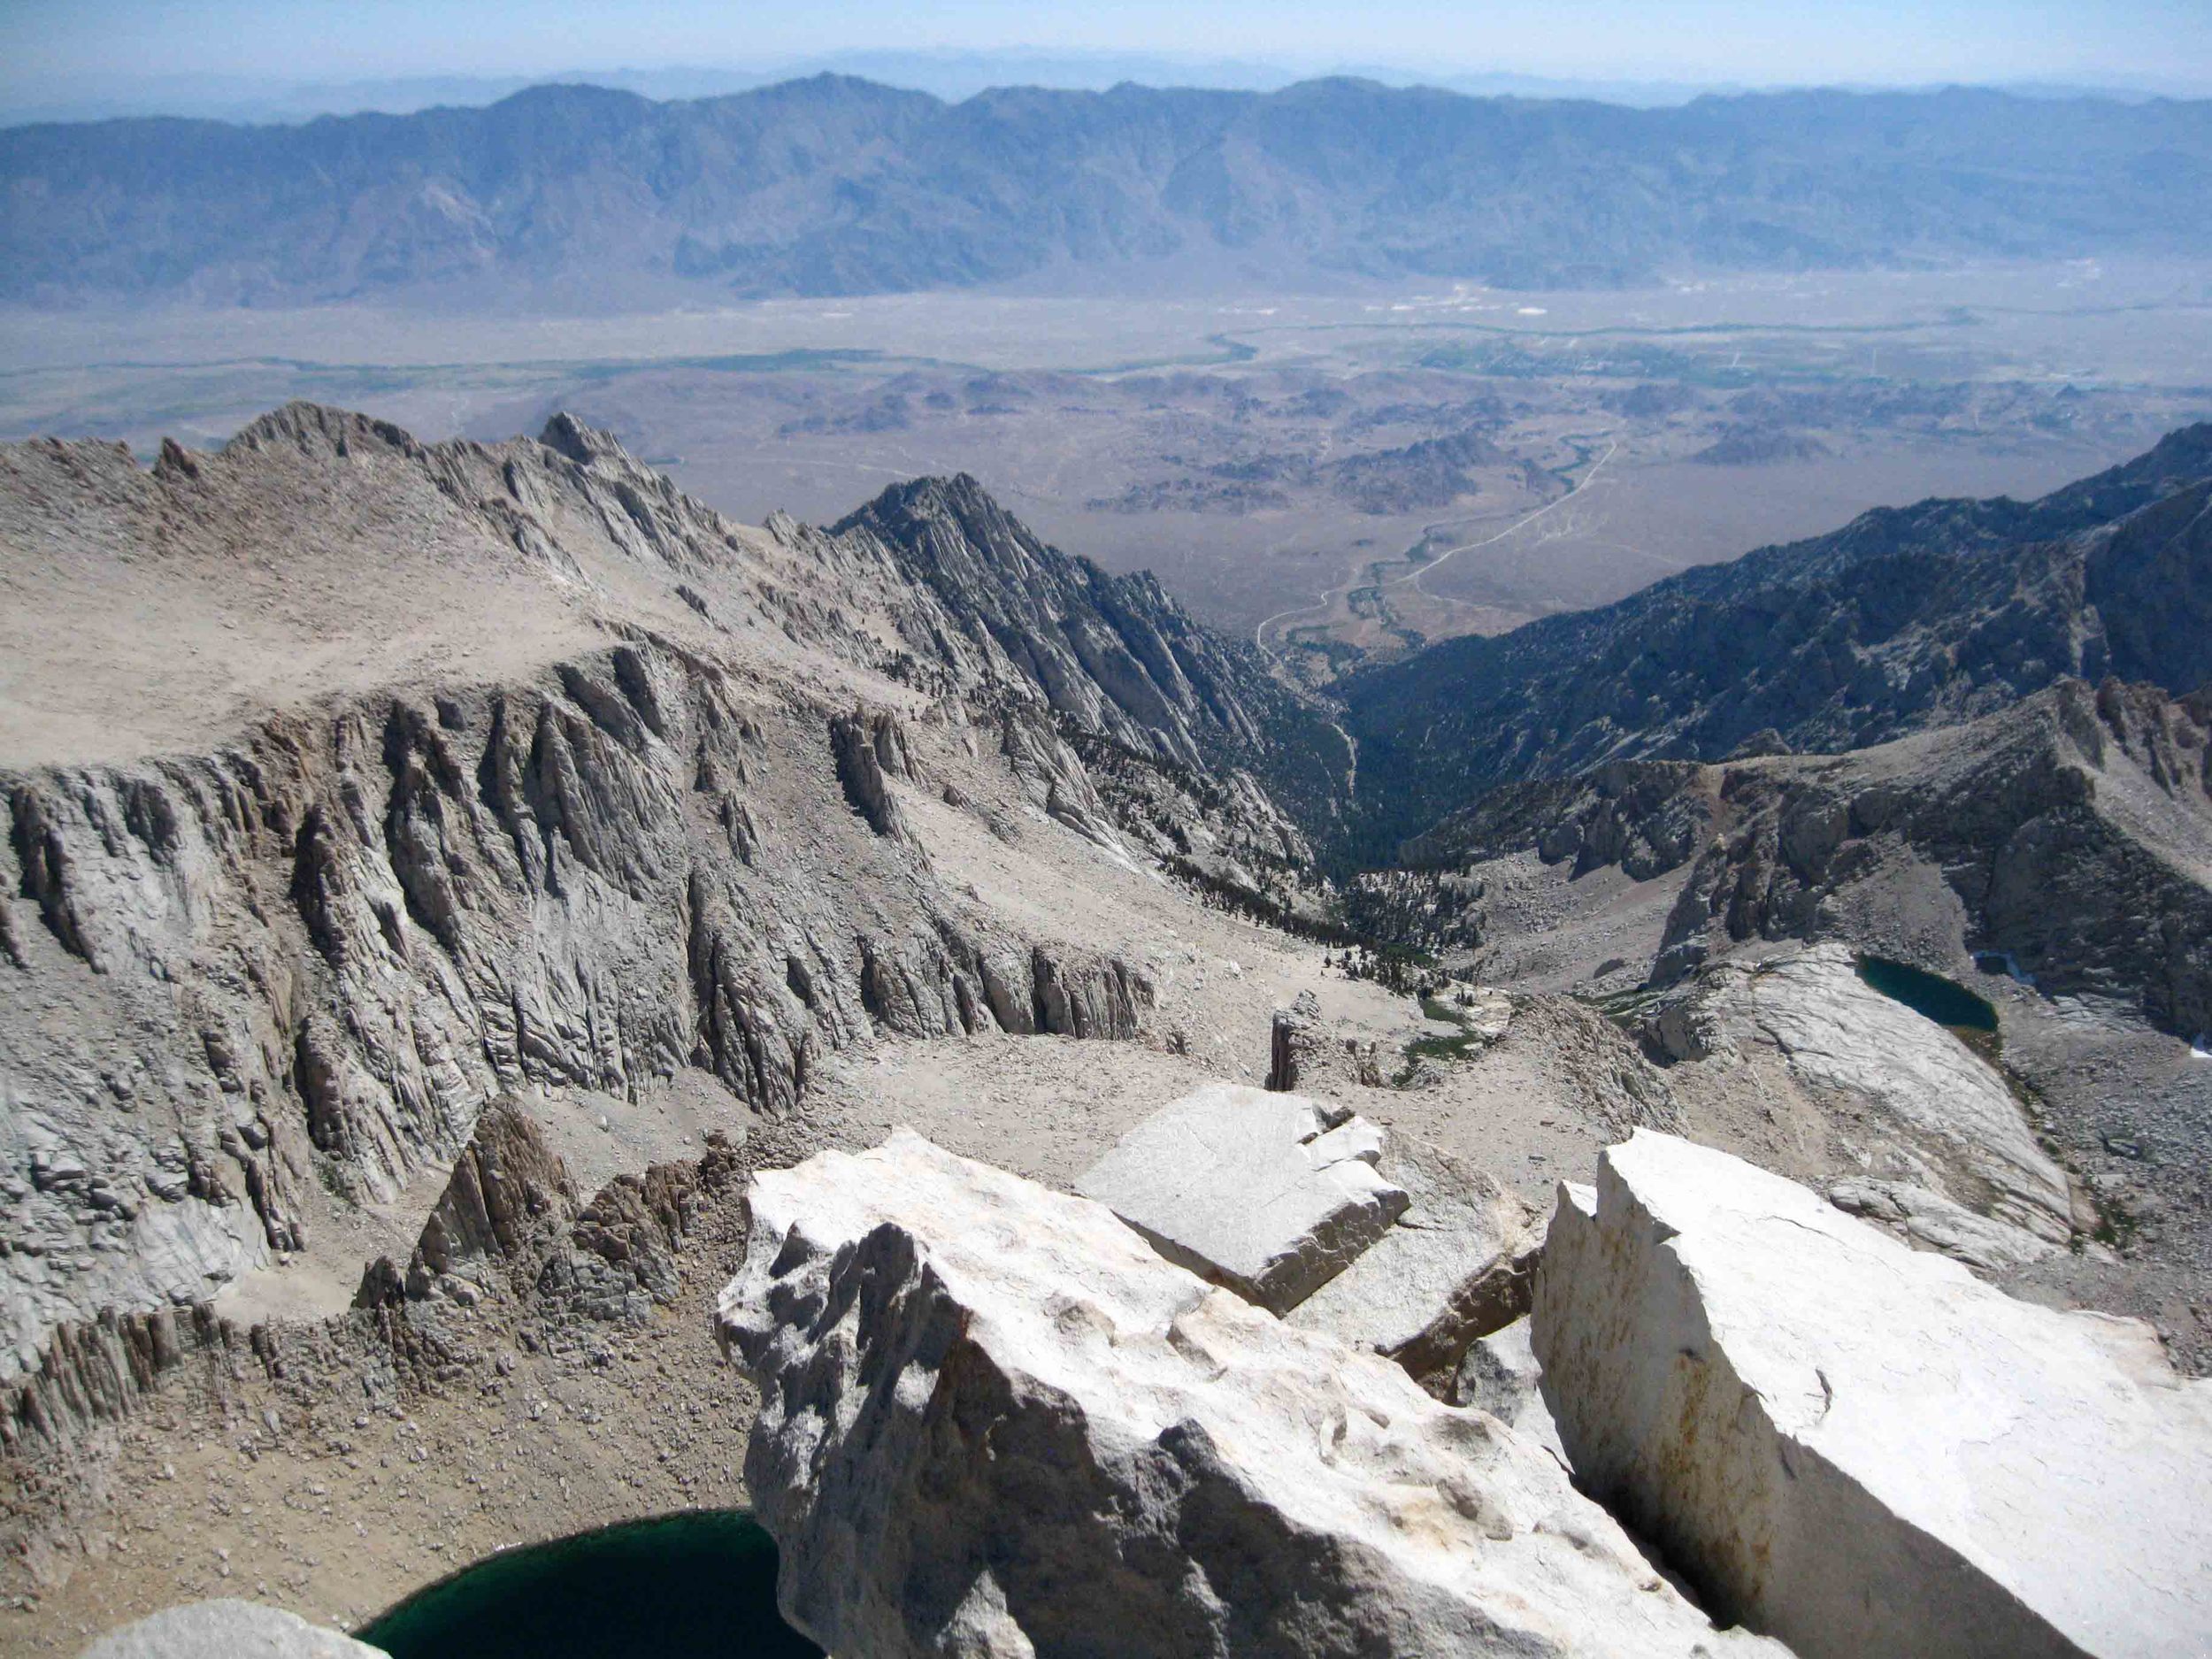 The view looking East from the top of Mount Whitney!